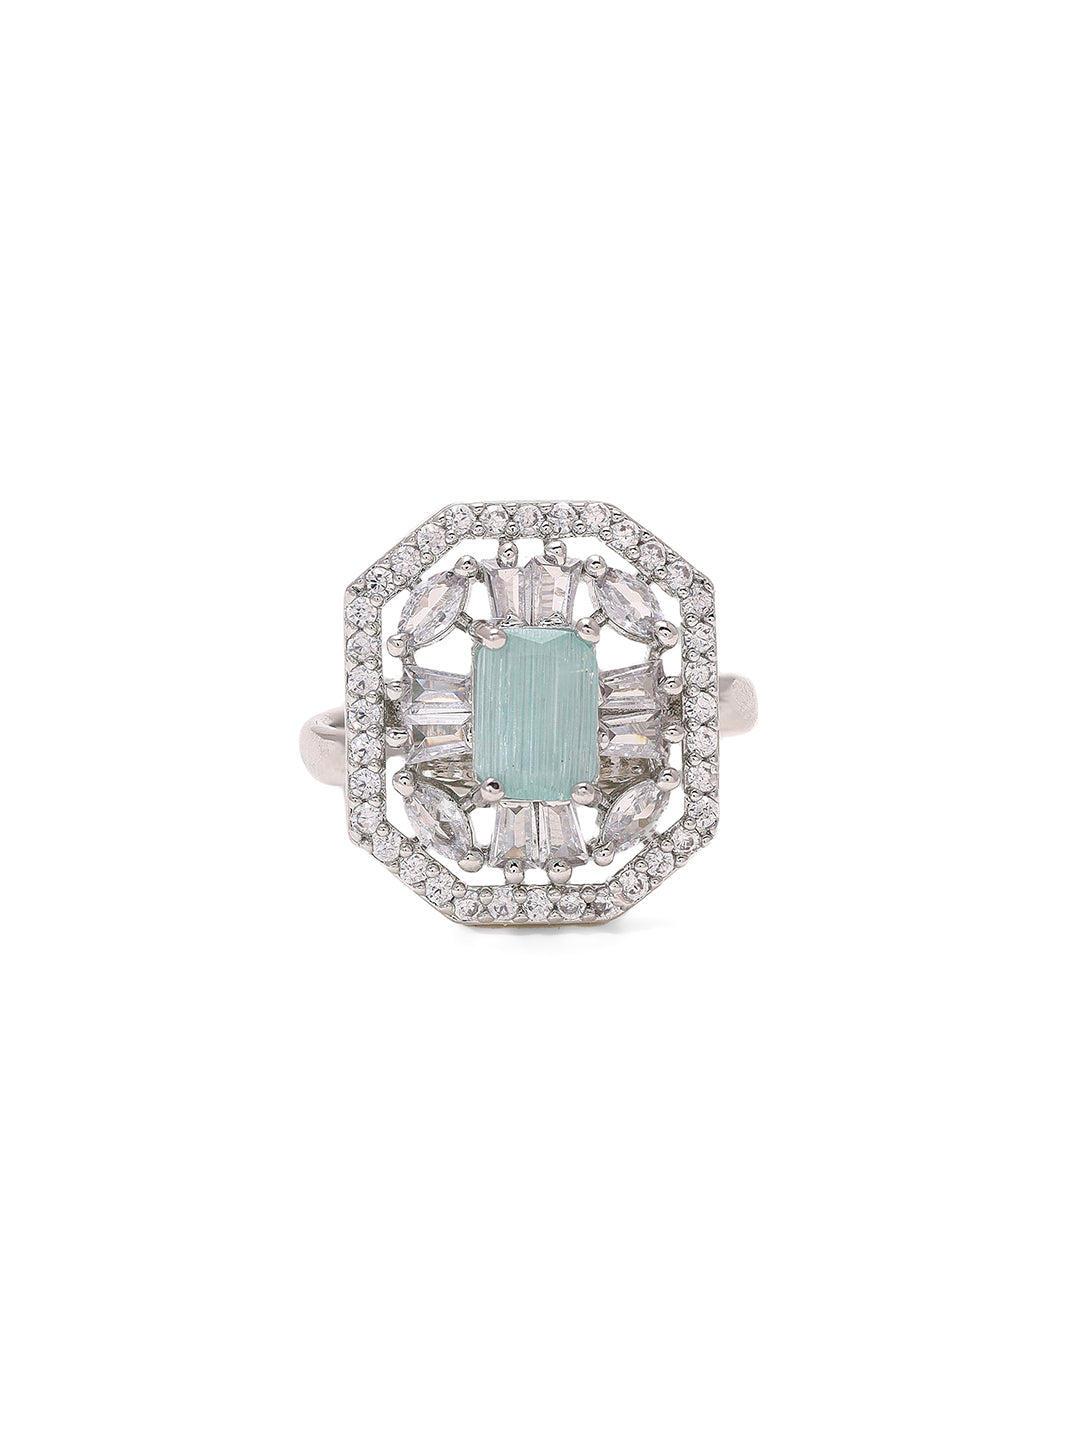 Priyaasi Silver-Plated Splendor with American Diamond Brilliance in Mint Majesty Ring